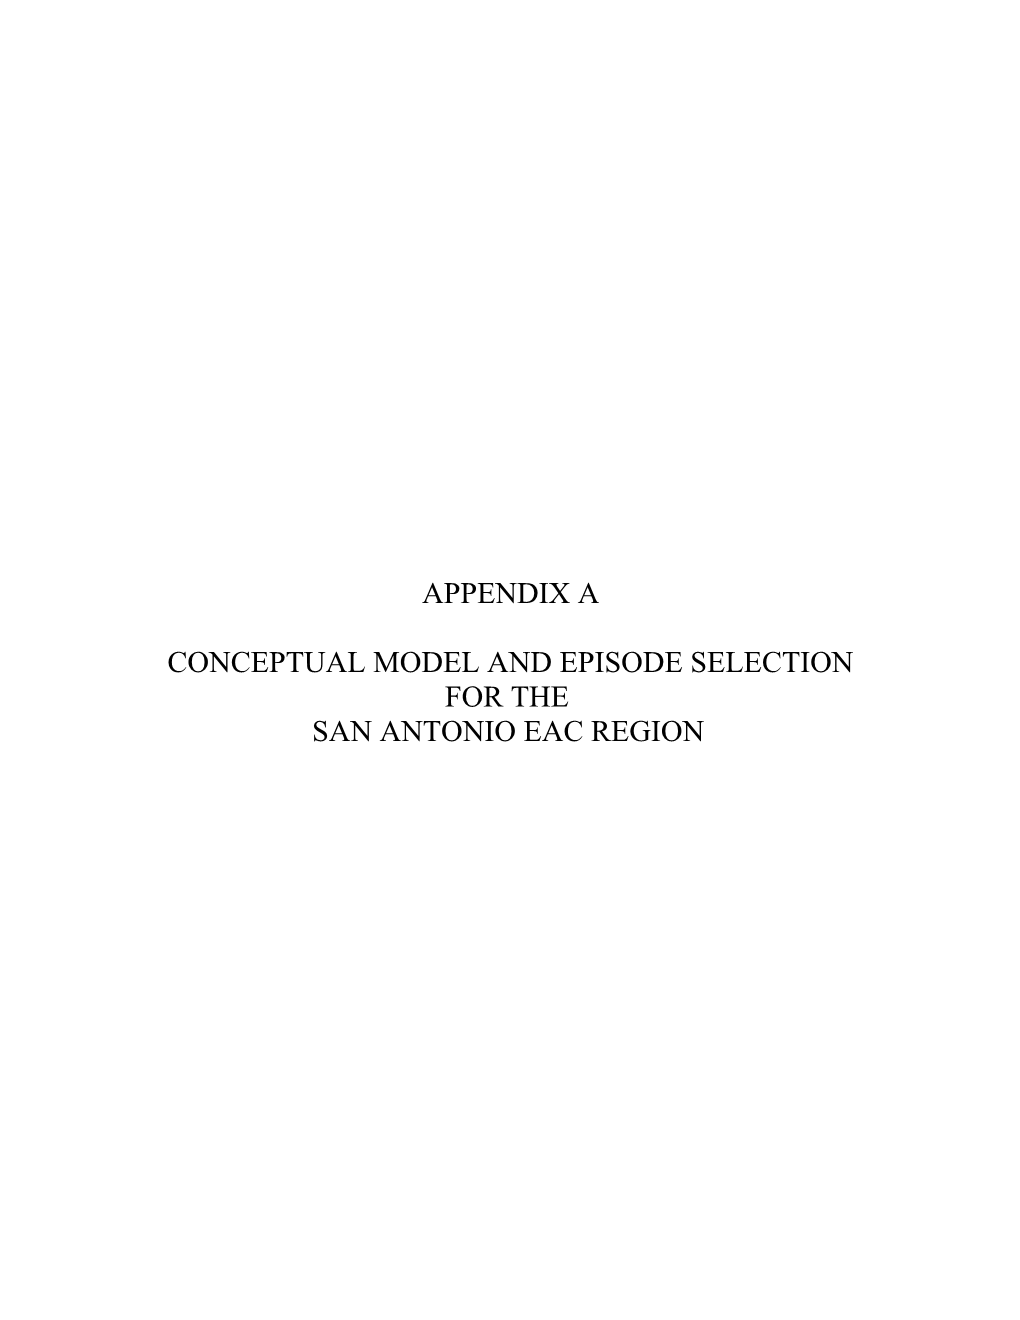 Conceptual Model and Episode Selection for The